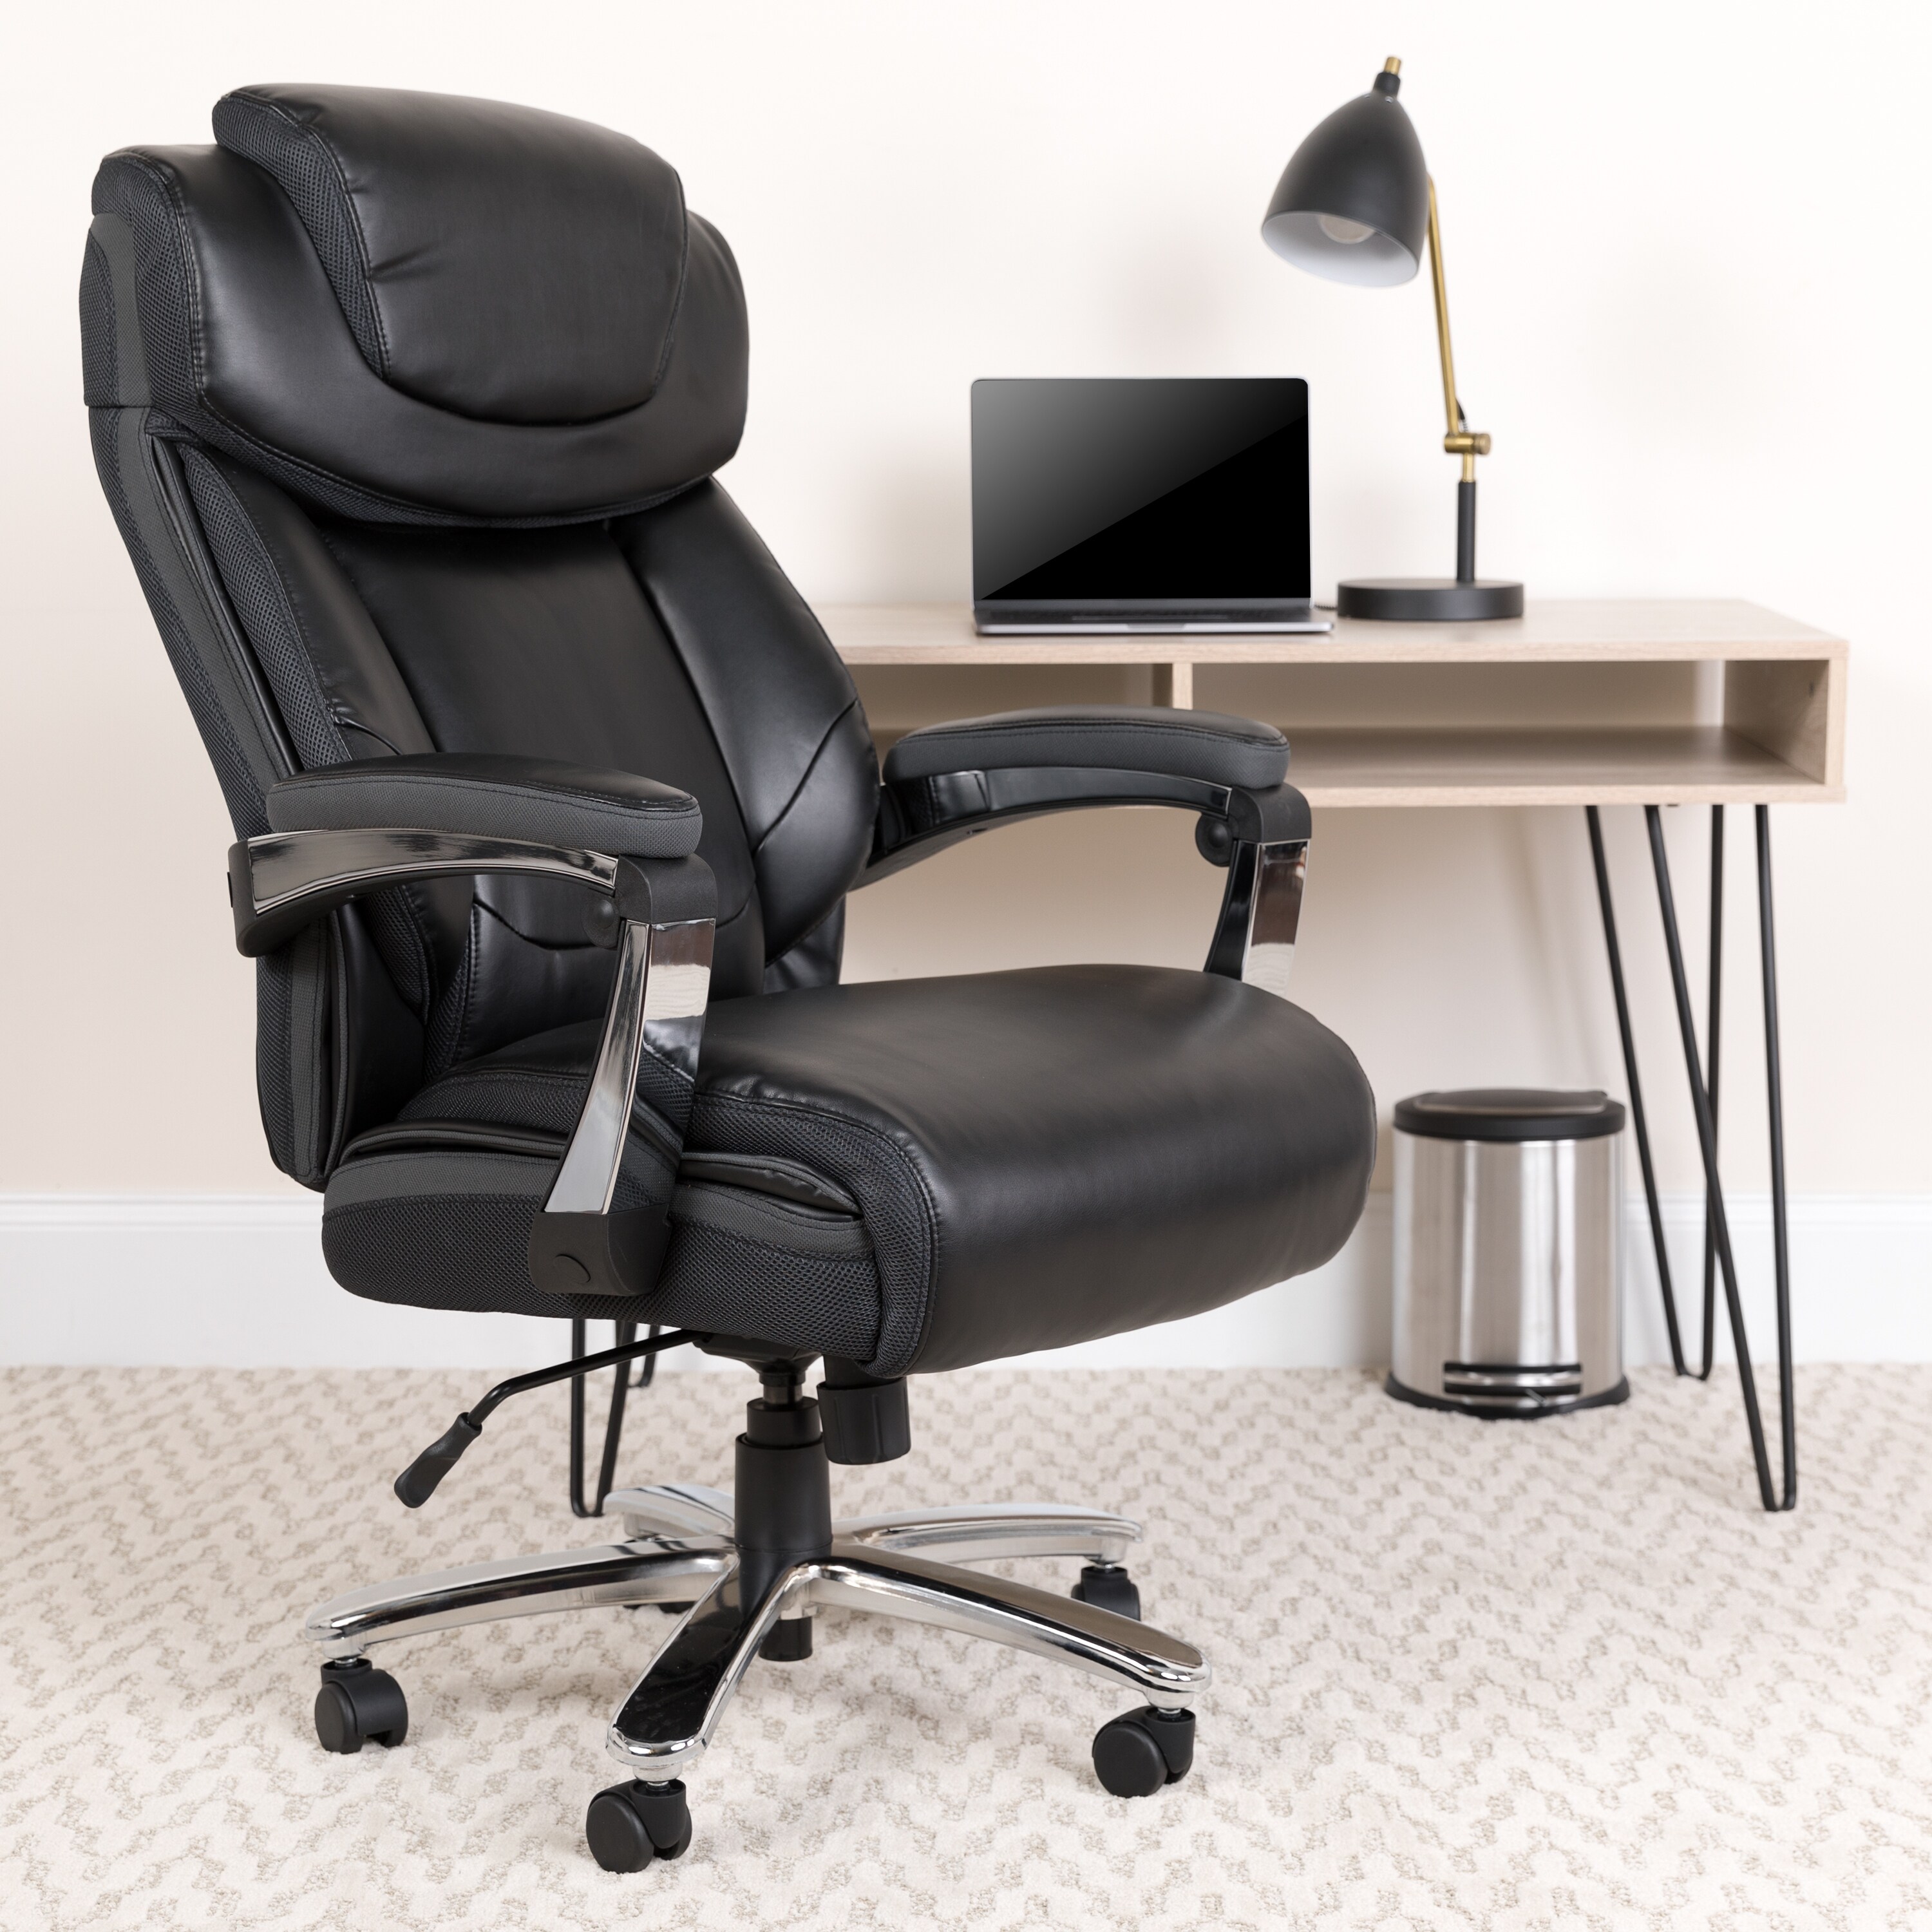 HOT Heavy Duty High Back Big and Tall Desk Chair Executive Ergonomic leather US 